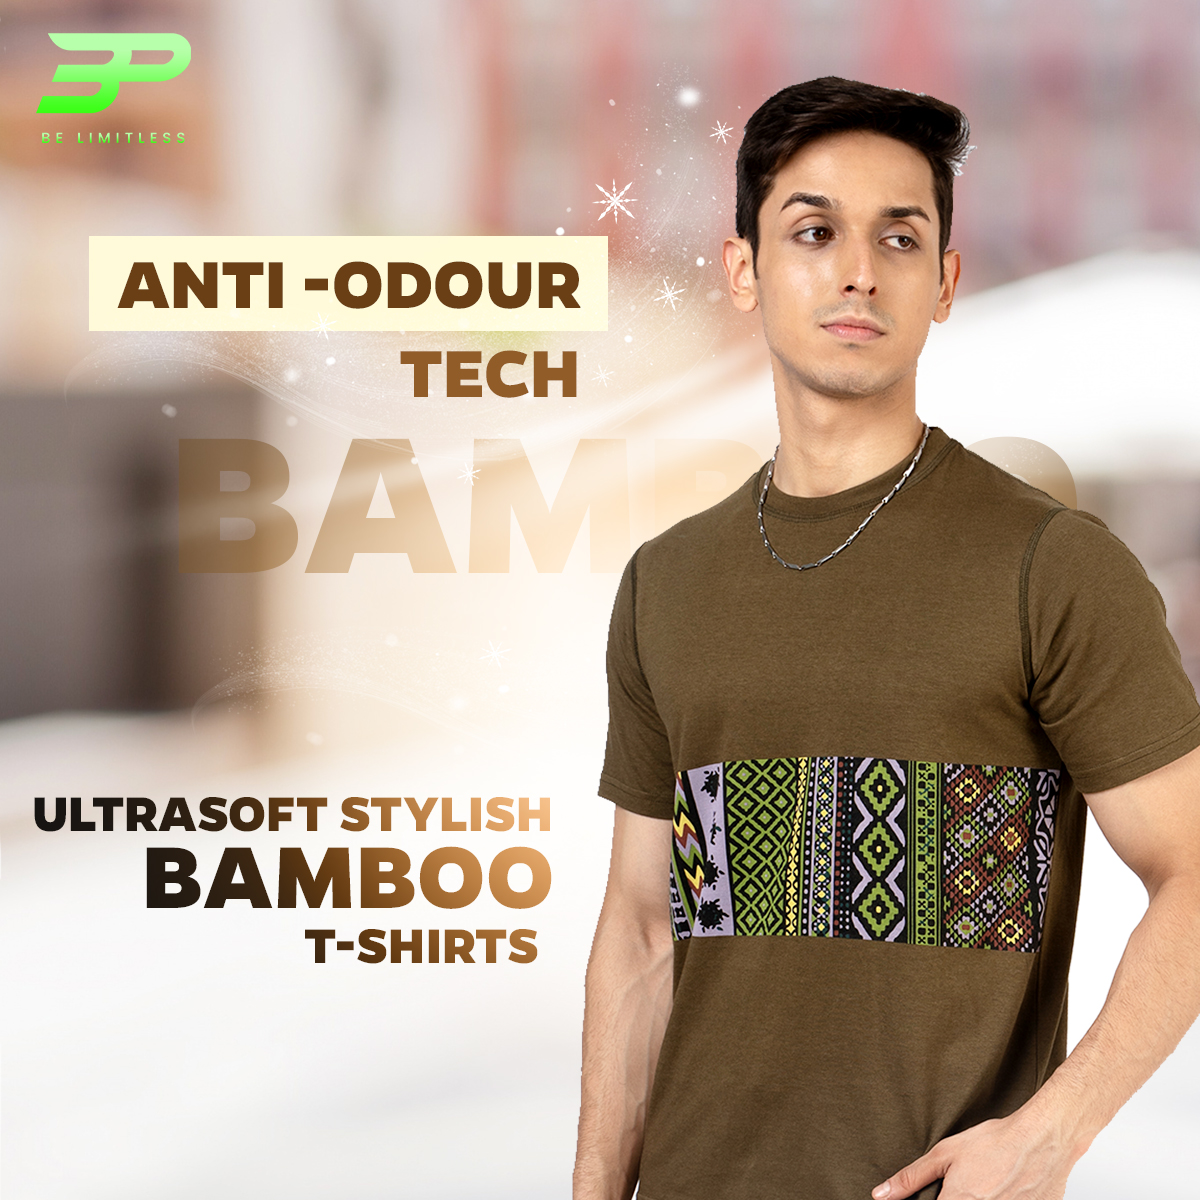 Experience ultimate comfort with 3rd Planet men's t-shirts. Made from bamboo fabric, they're soft, breathable, and perfect for hot summer days. 

#tshirts #bambootshirt #bambootshirts #bambootshirt📷 #bambootee #bambootshirts #3rdplanet #onlinetshirts #Bamboo #bambooclothing